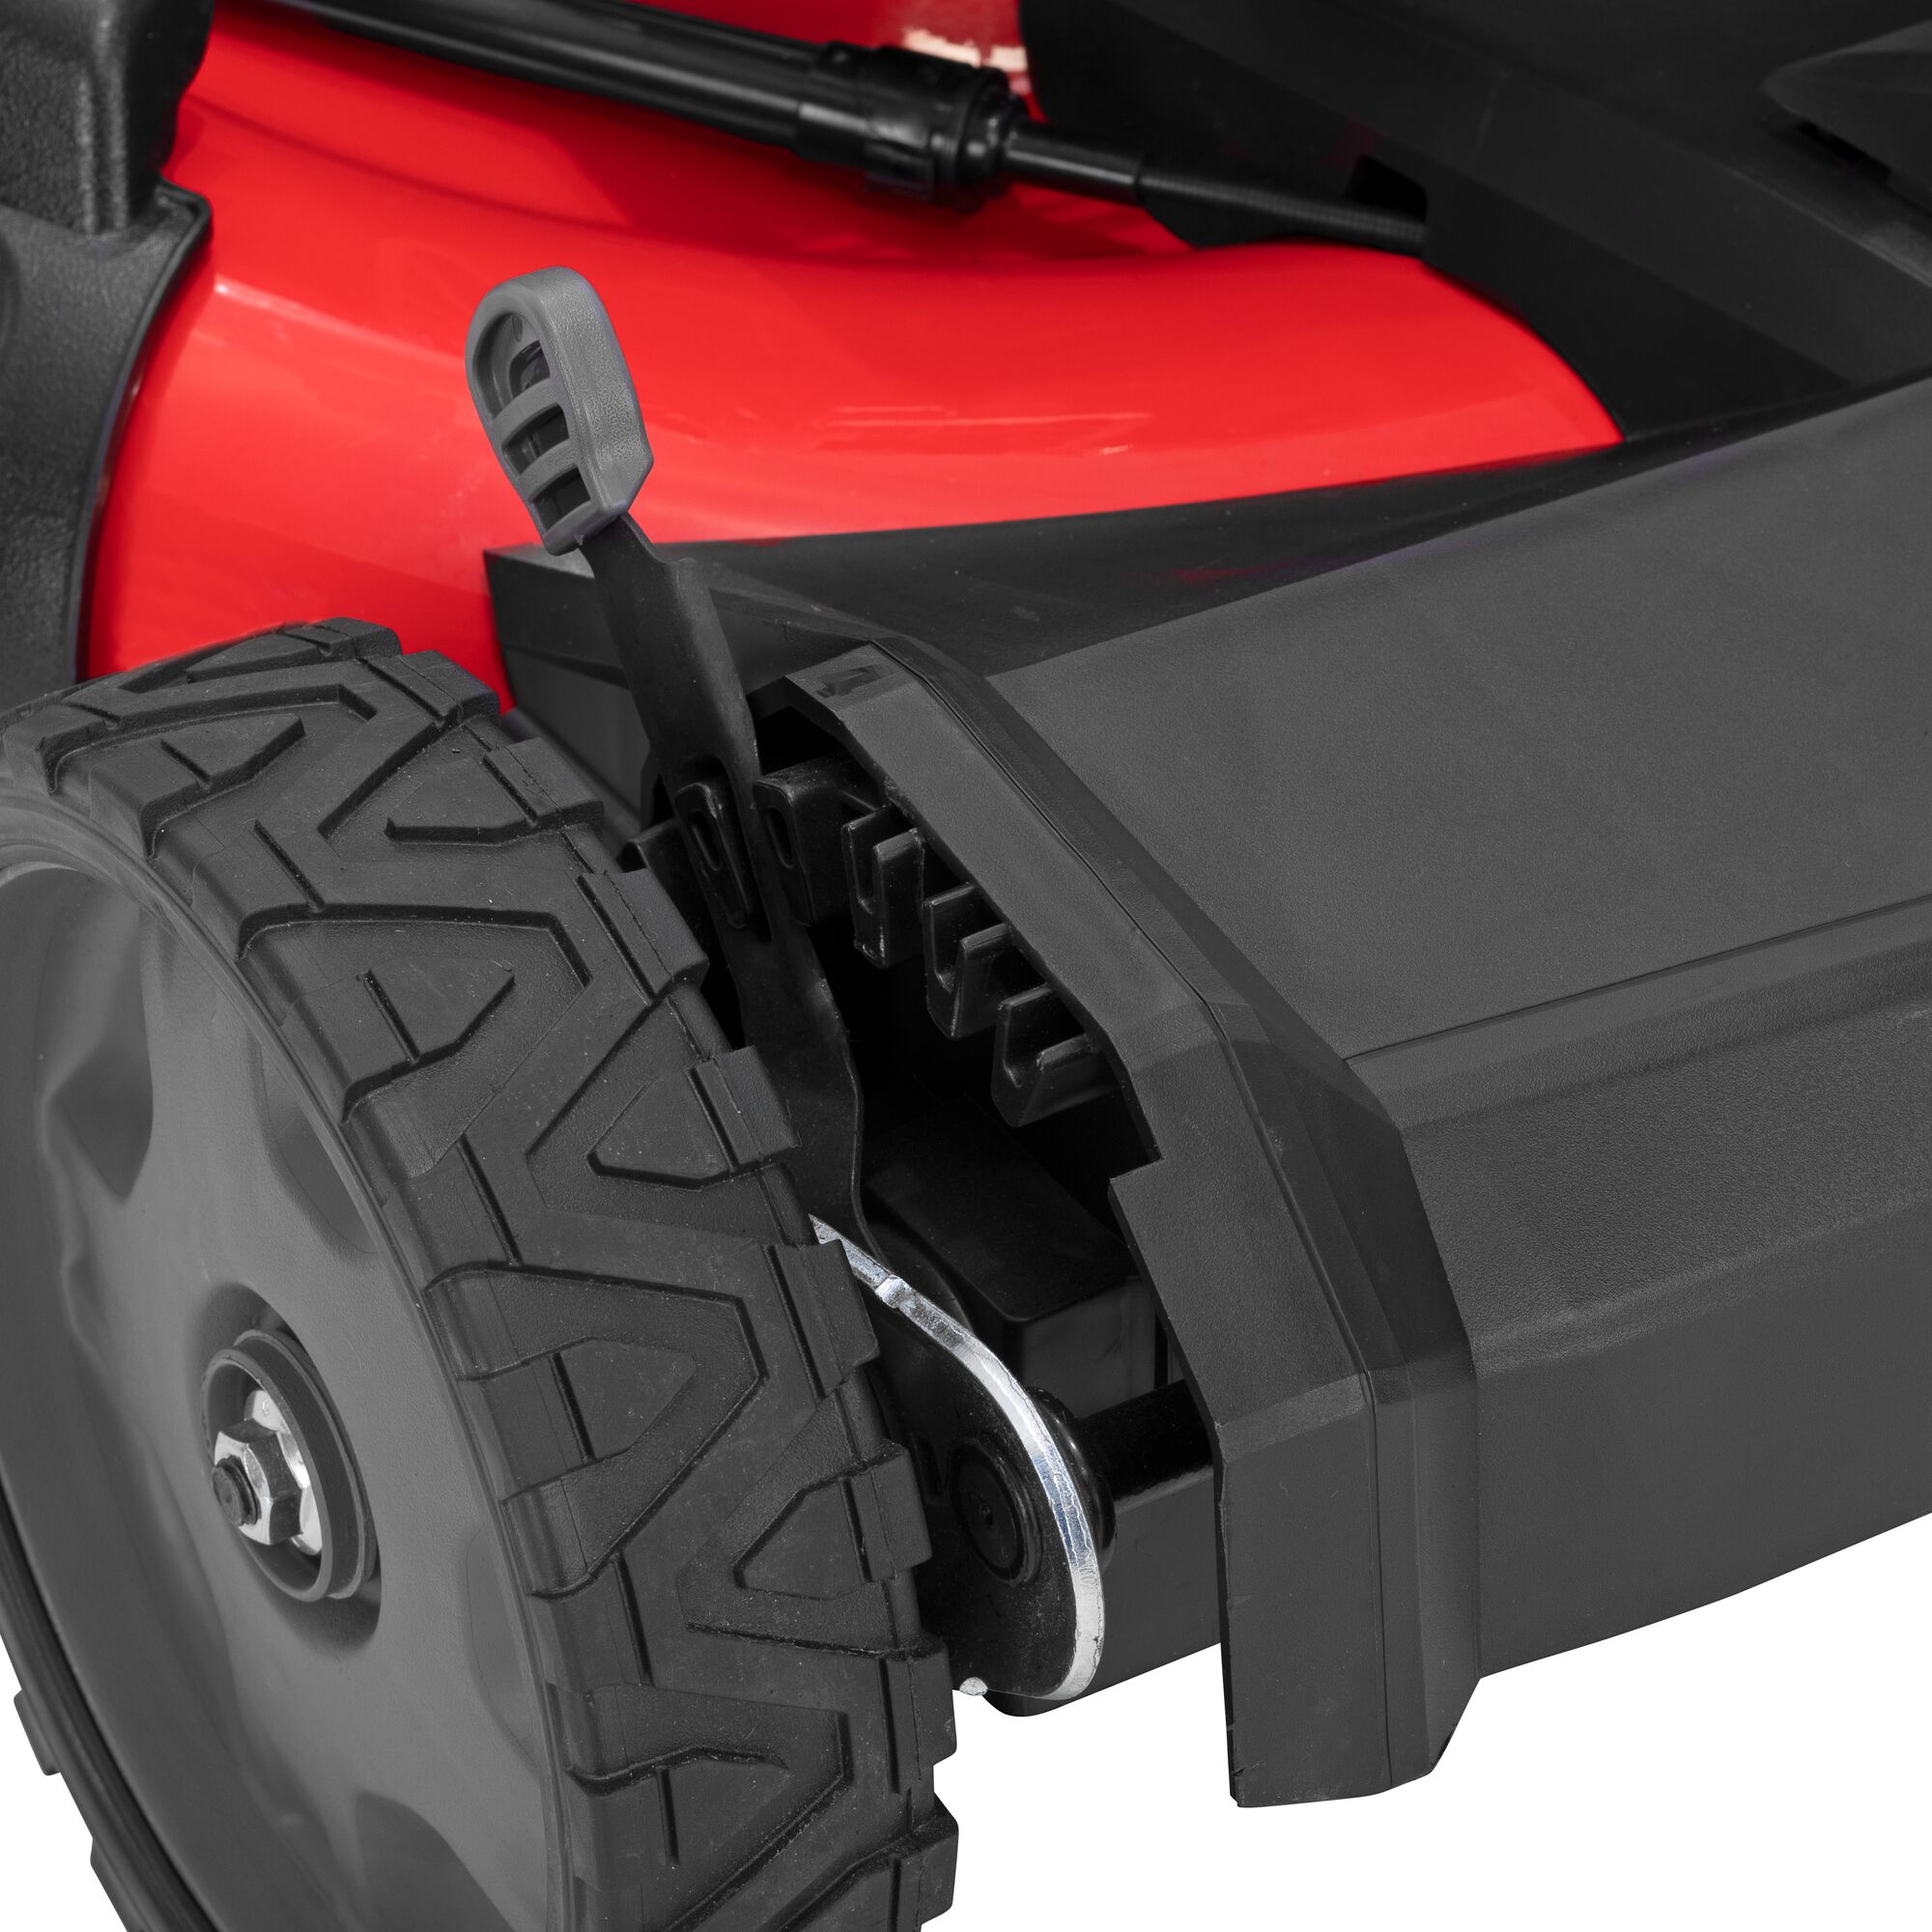 M220 140-cc 21-in Self-propelled Gas Push Lawn Mower with Briggs & Stratton 140cc Engine